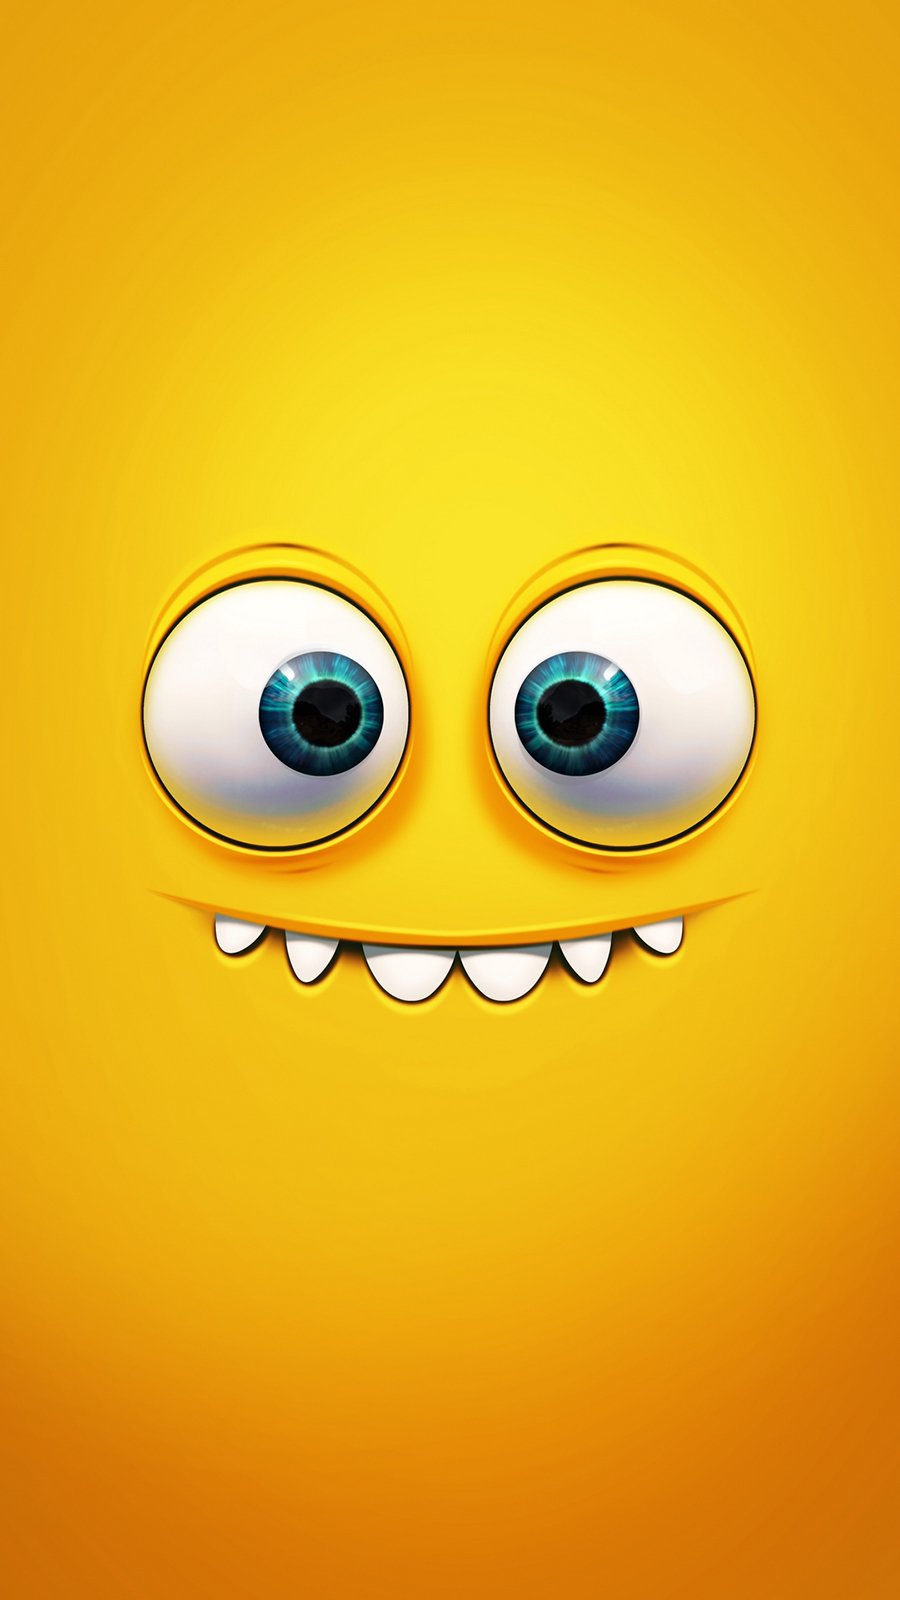 Emoji Wallpaper - Cute Backgrounds:Amazon.co.uk:Appstore for Android-sgquangbinhtourist.com.vn